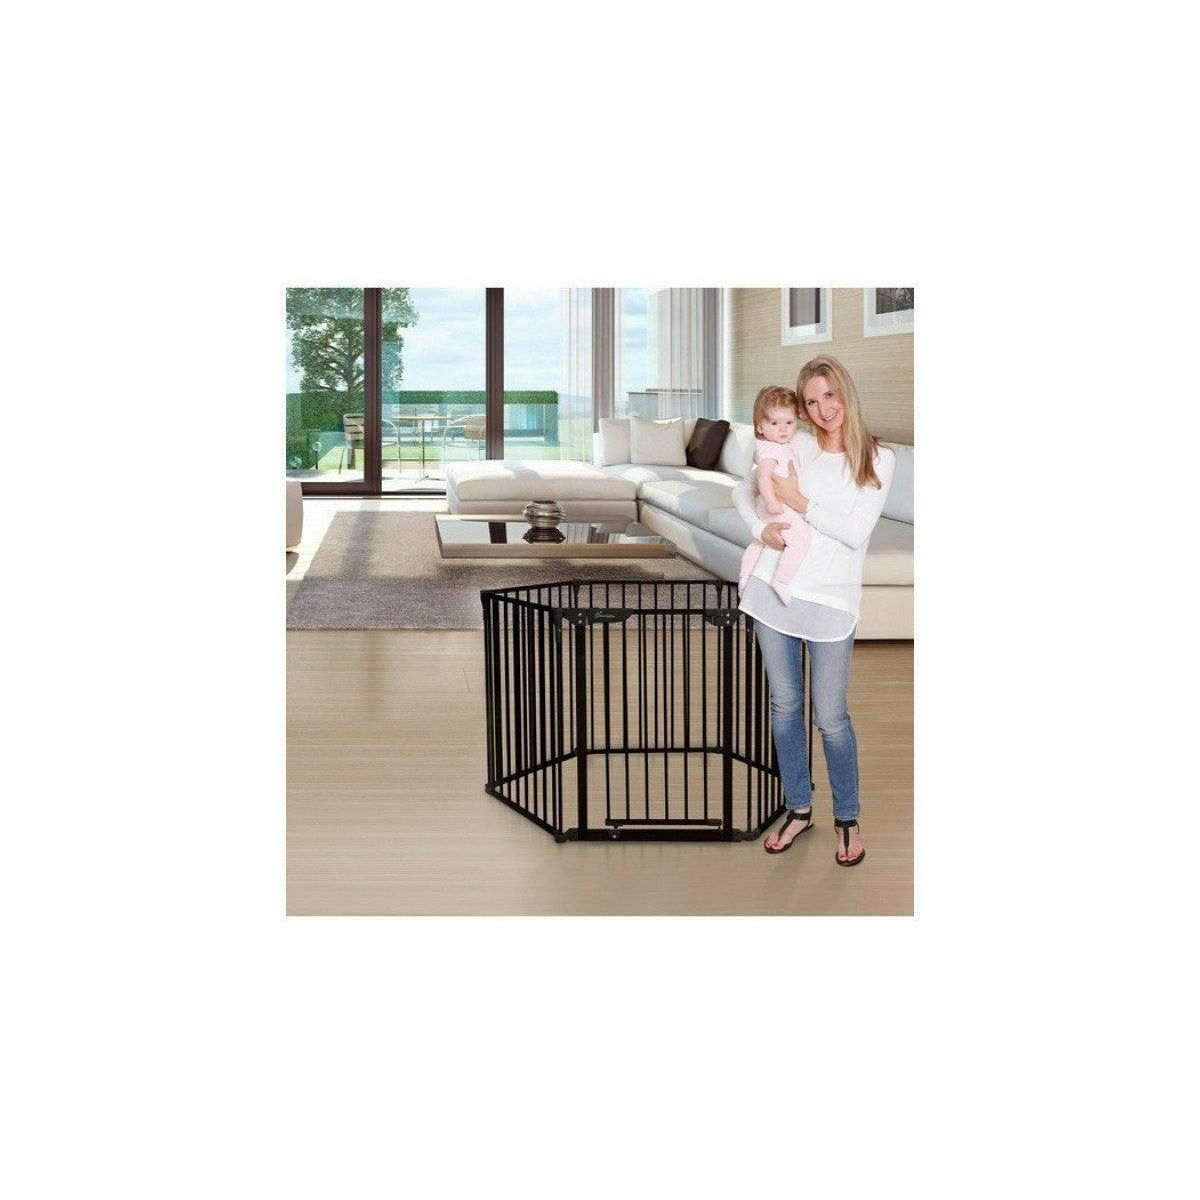 DREAMBABY Royale Converta 3-in-1 Metal Playpen - Black G2003 - BumbleToys - 0-24 Months, Babies, Baby Saftey & Health, Boys, Cecil, Girls, Pre-Order